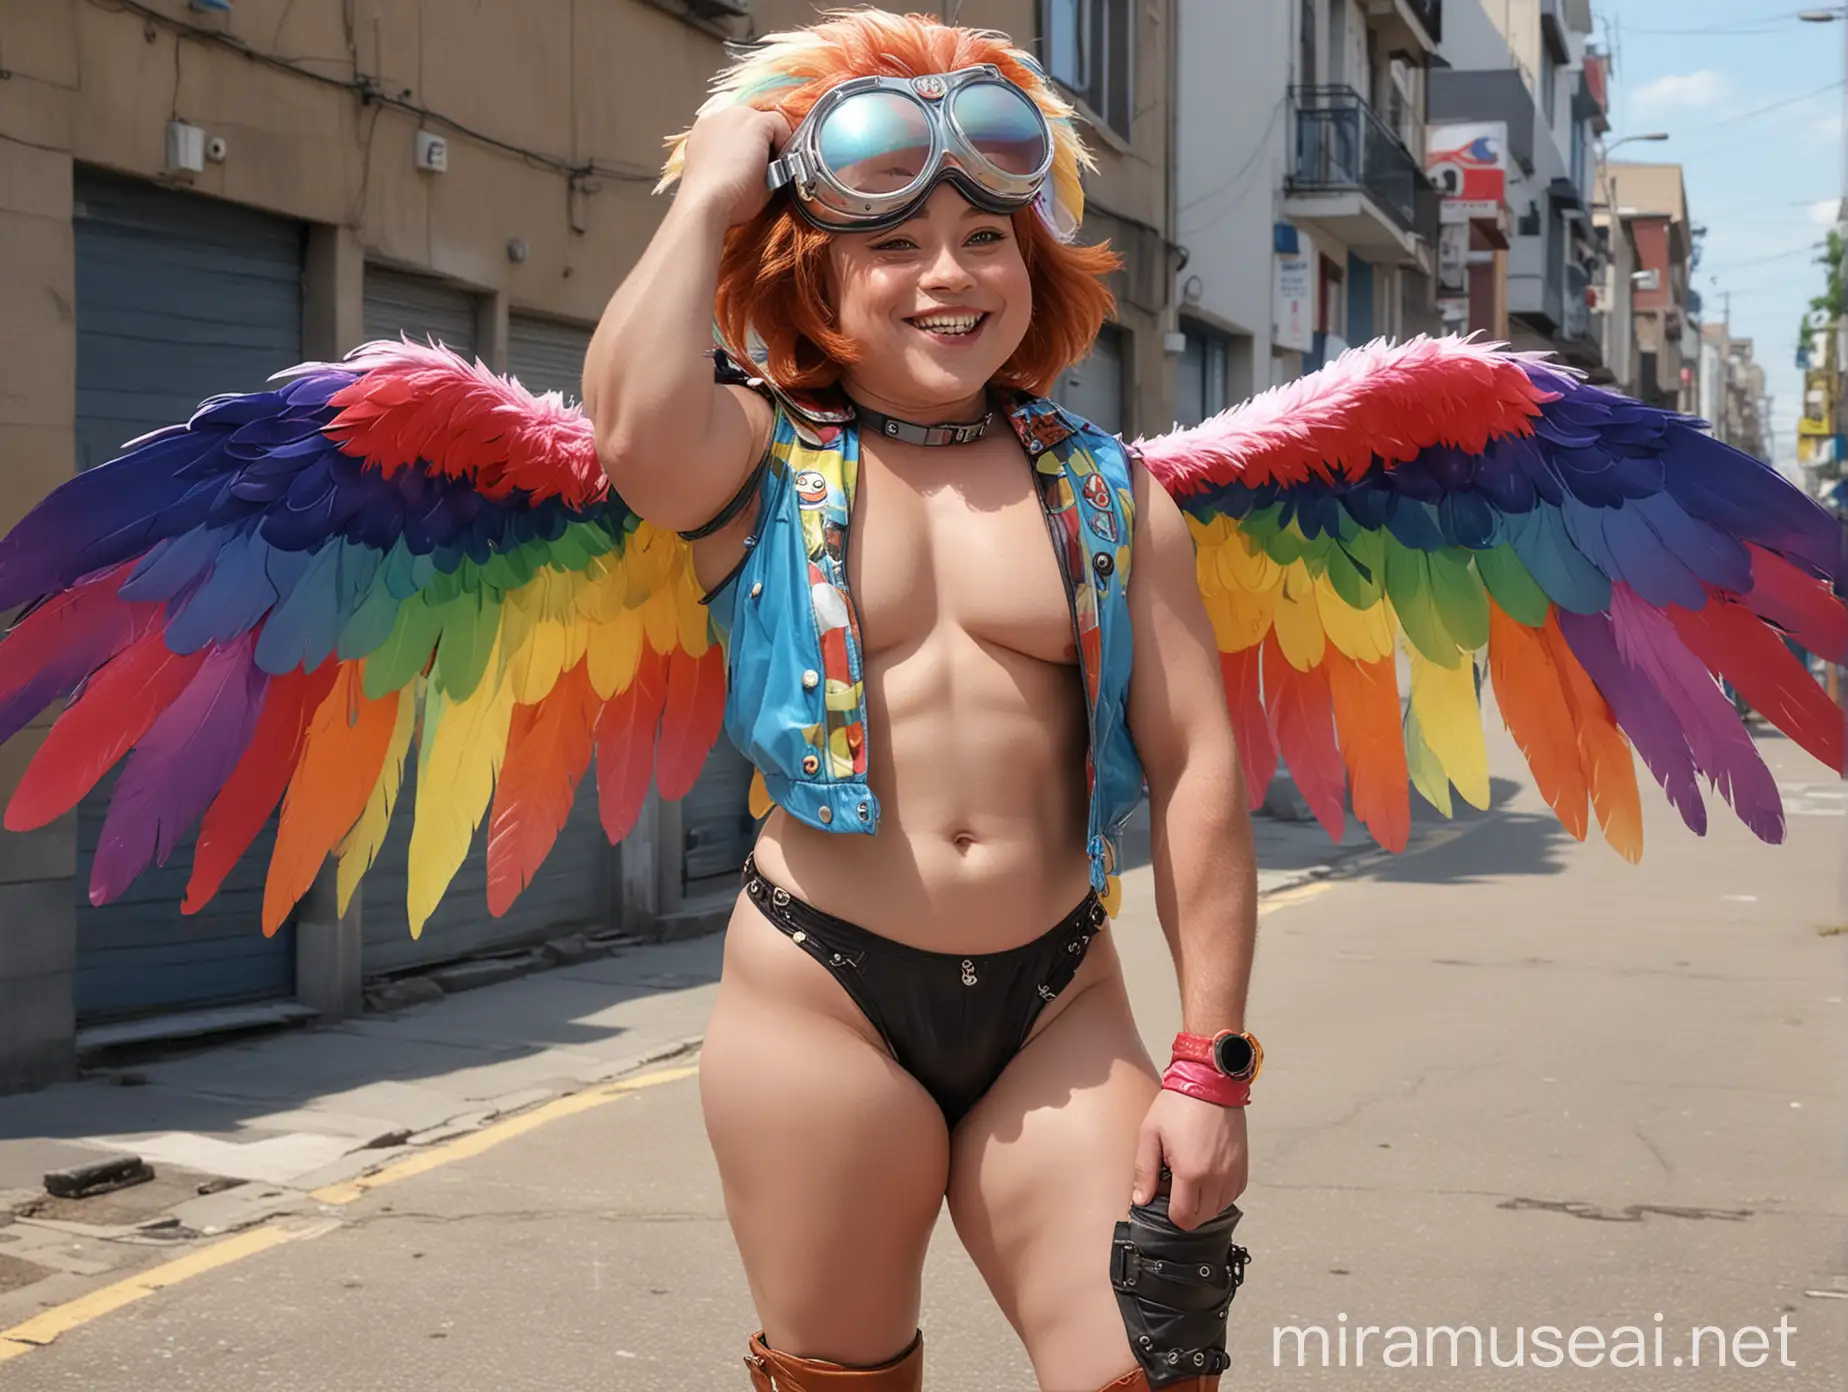 Muscular Redhead Bodybuilder Flexing with Colorful Eagle Wings Jacket